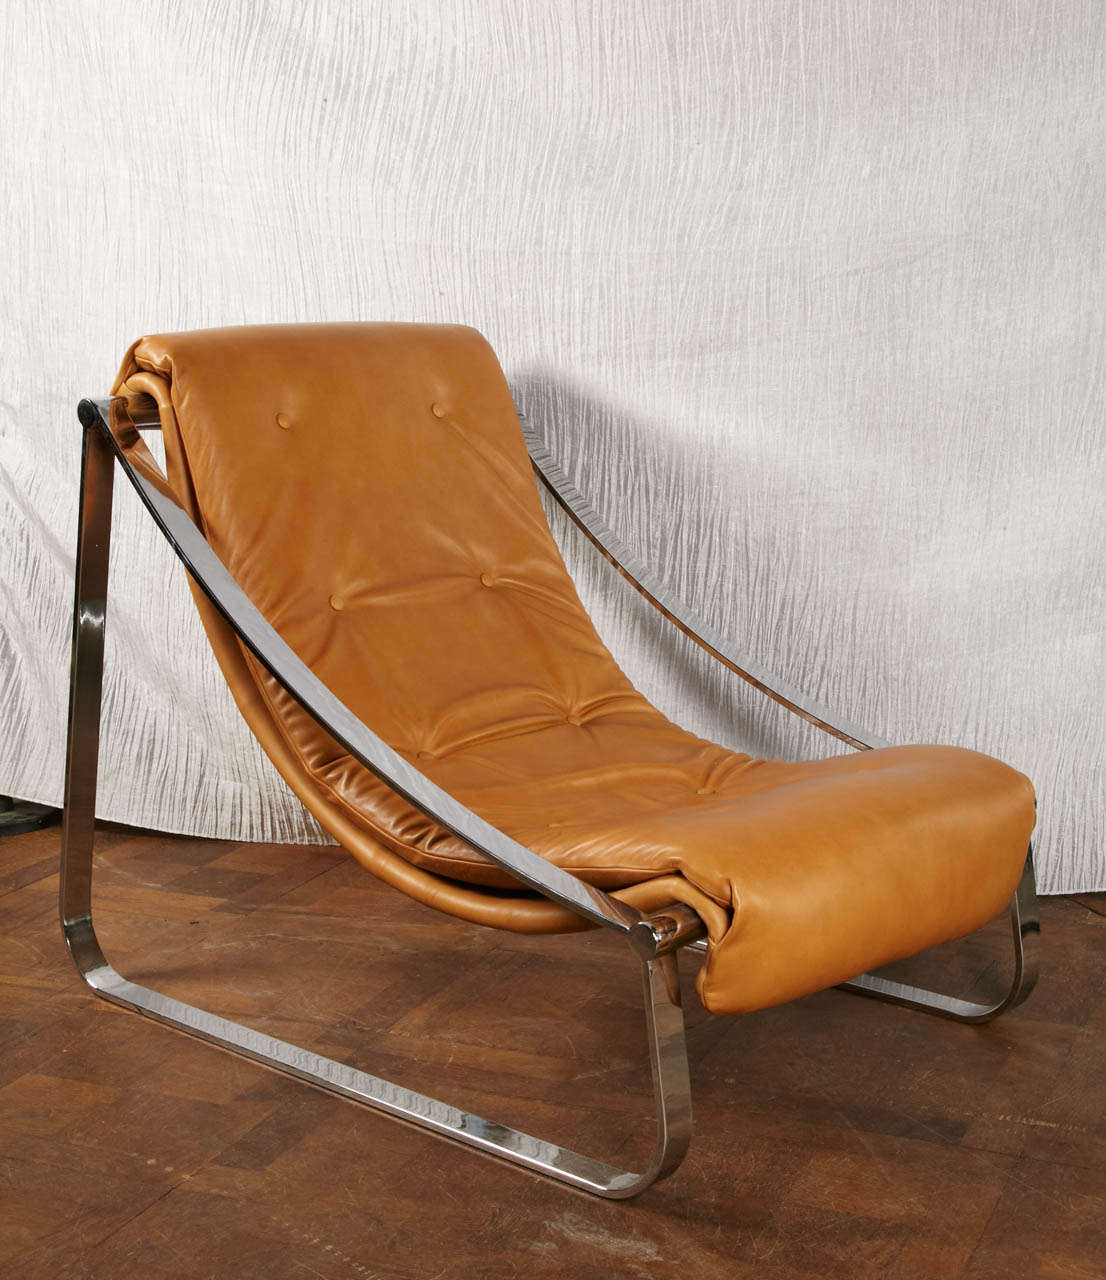 Chrome steel structure. Chrome is very correct, unpitted.
Seating has been redone in light brown colour lamb leather.